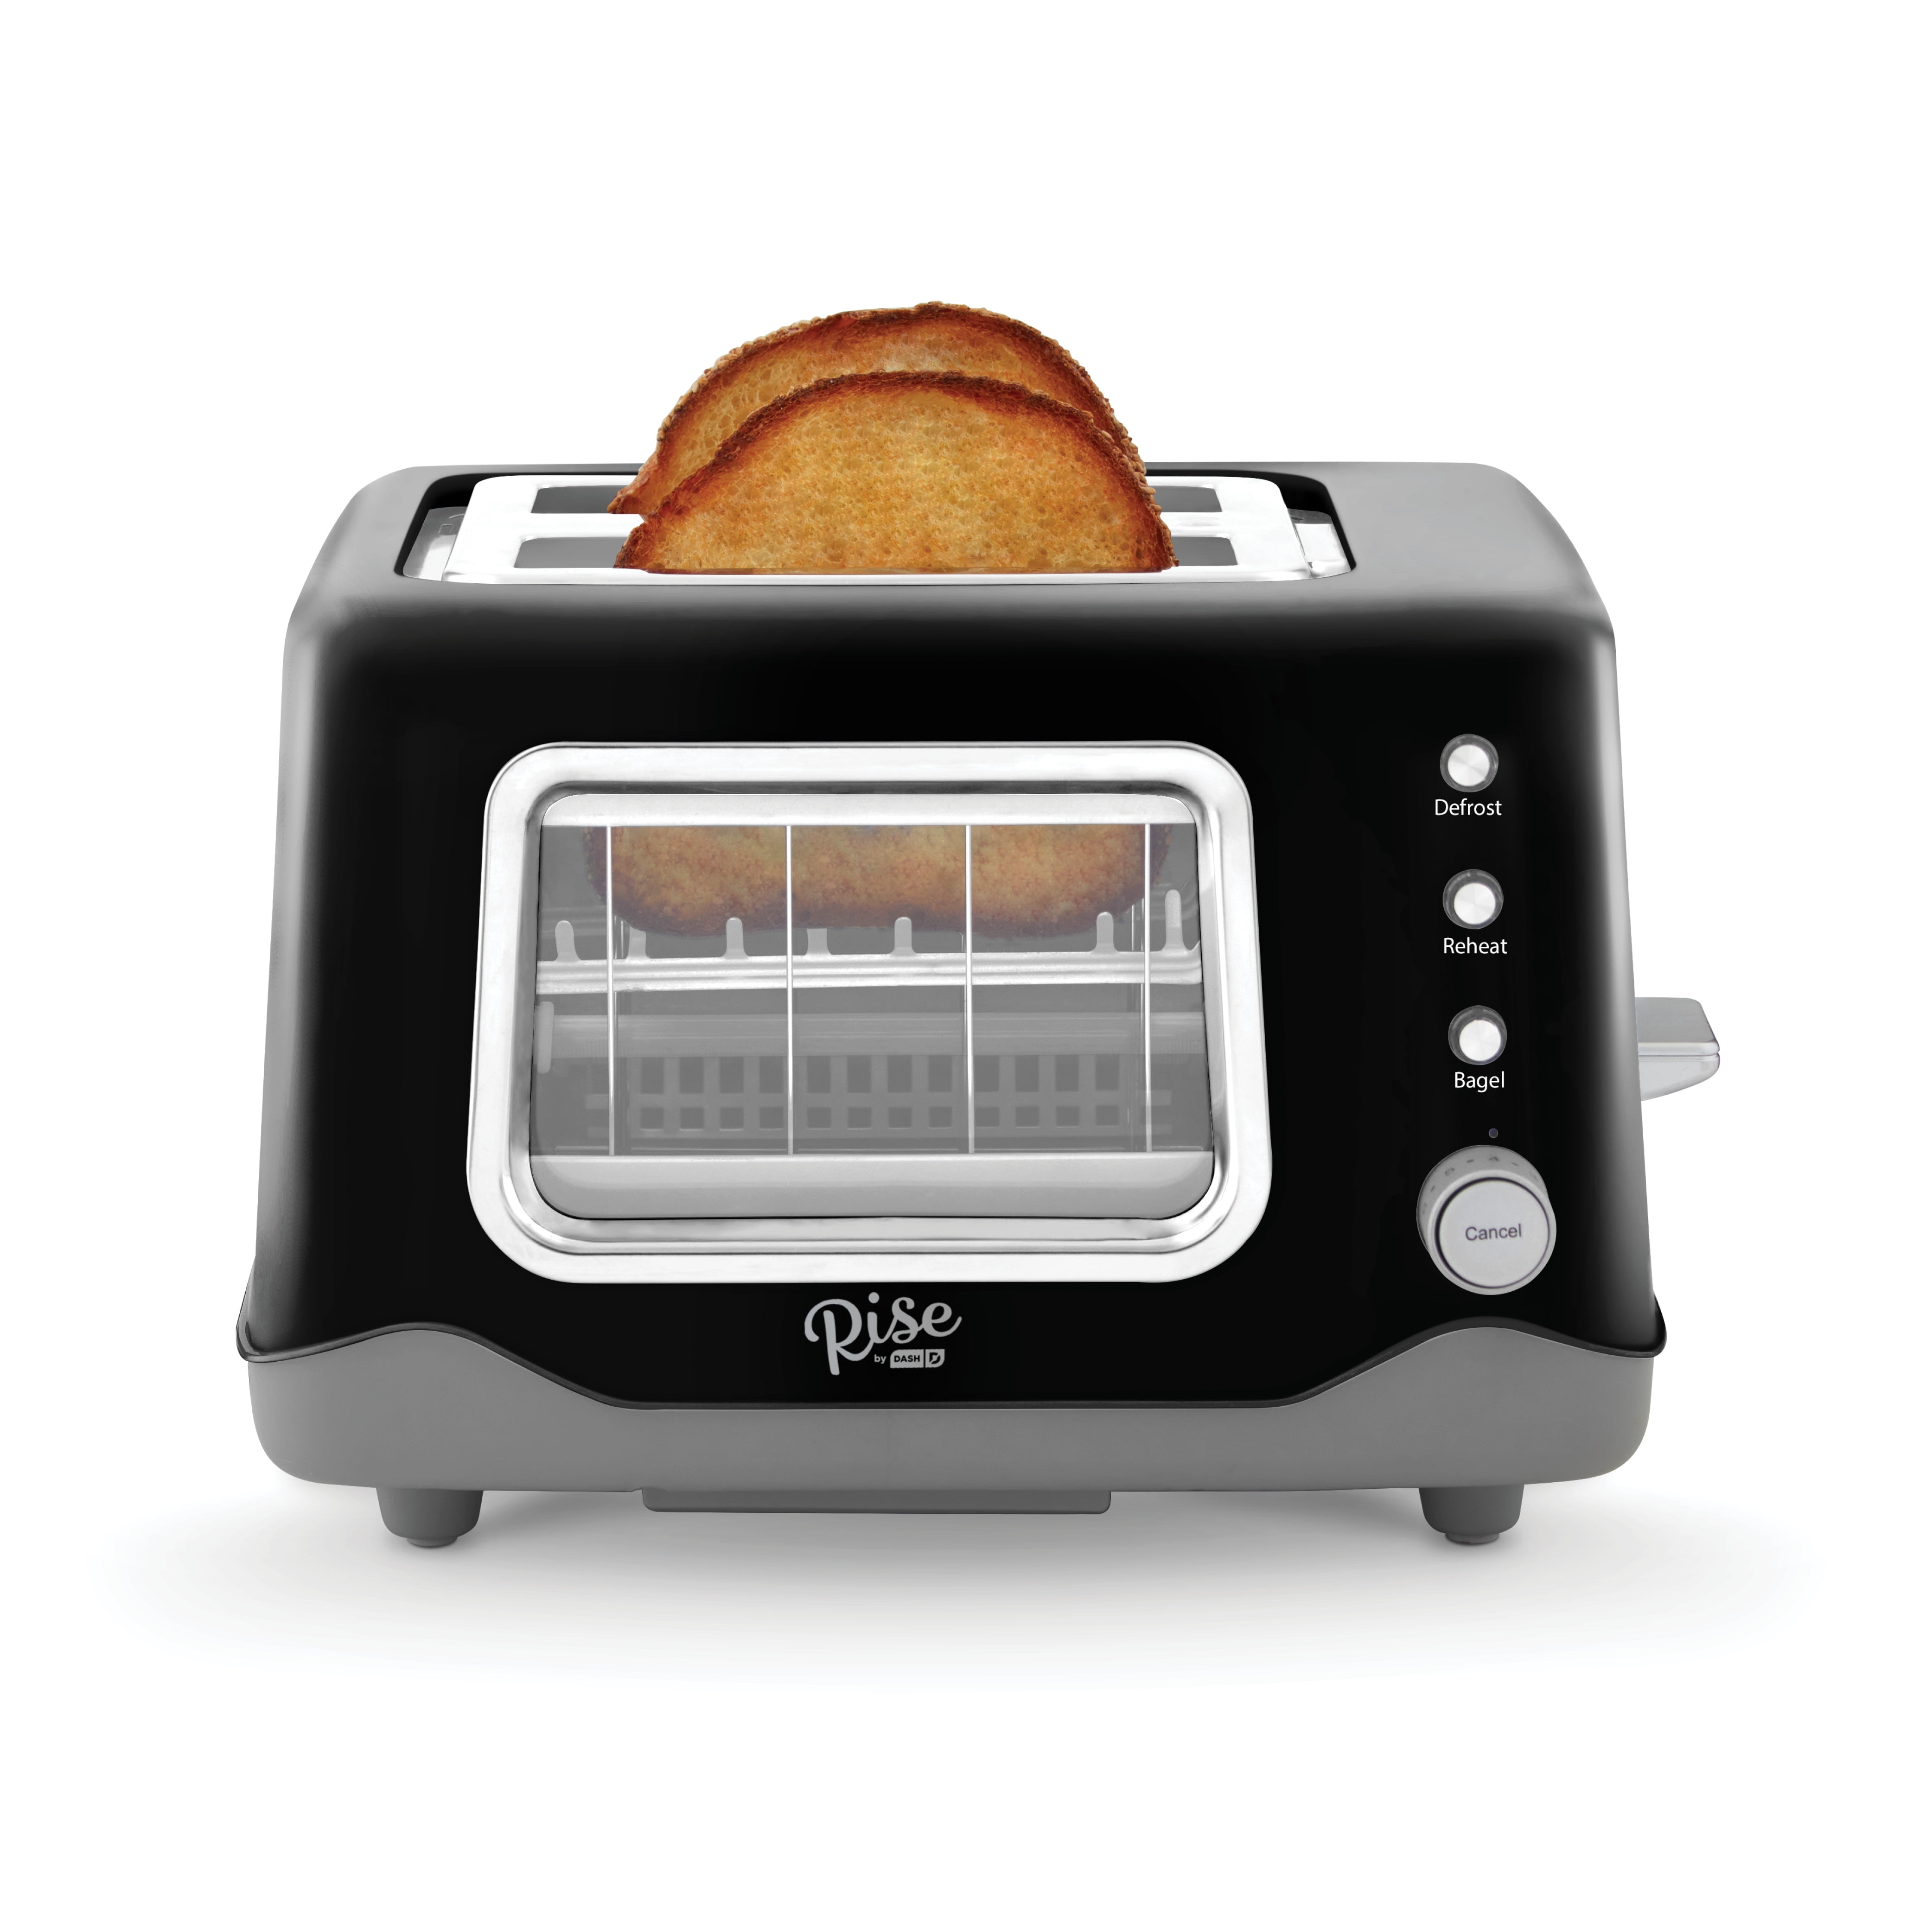 Rise by Dash Clear View 2-Slice Toaster with See Through Window - Defrost,  Reheat, Feature for Bagels + Auto Shut off - Black 